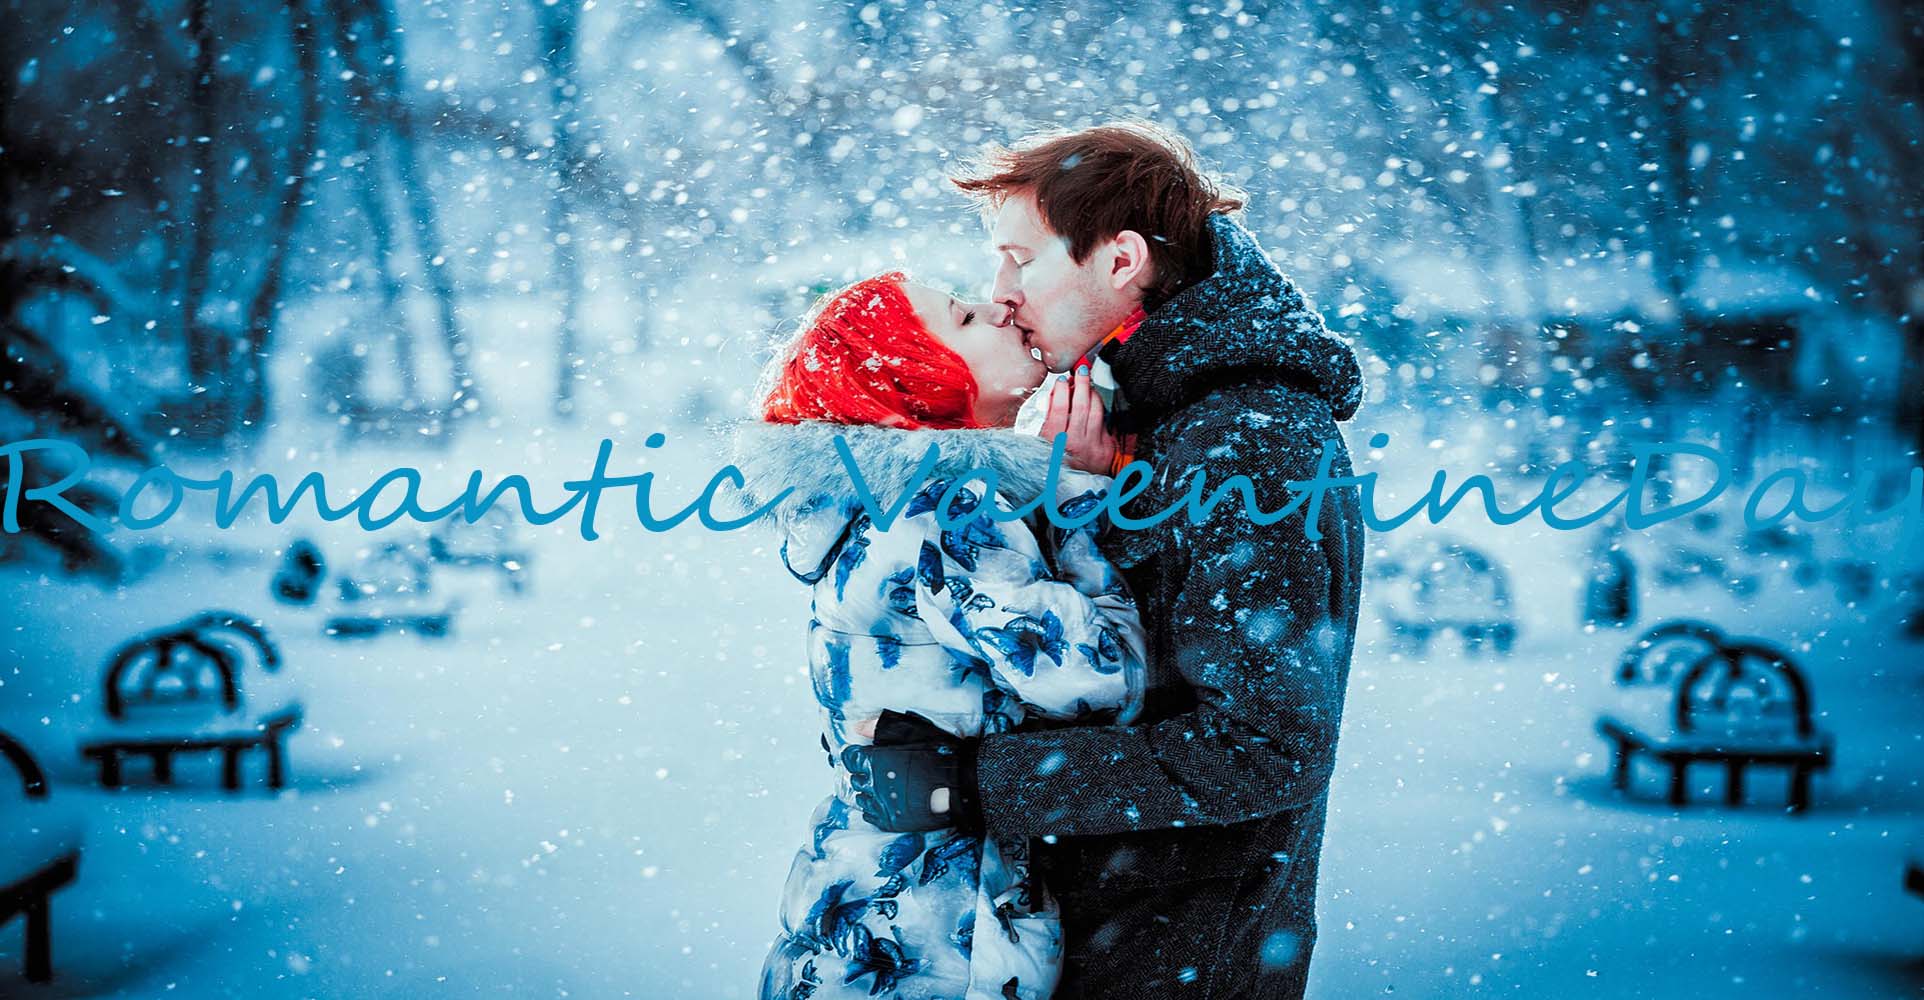 Free download Best 10 Romantic Couples Valentine Day